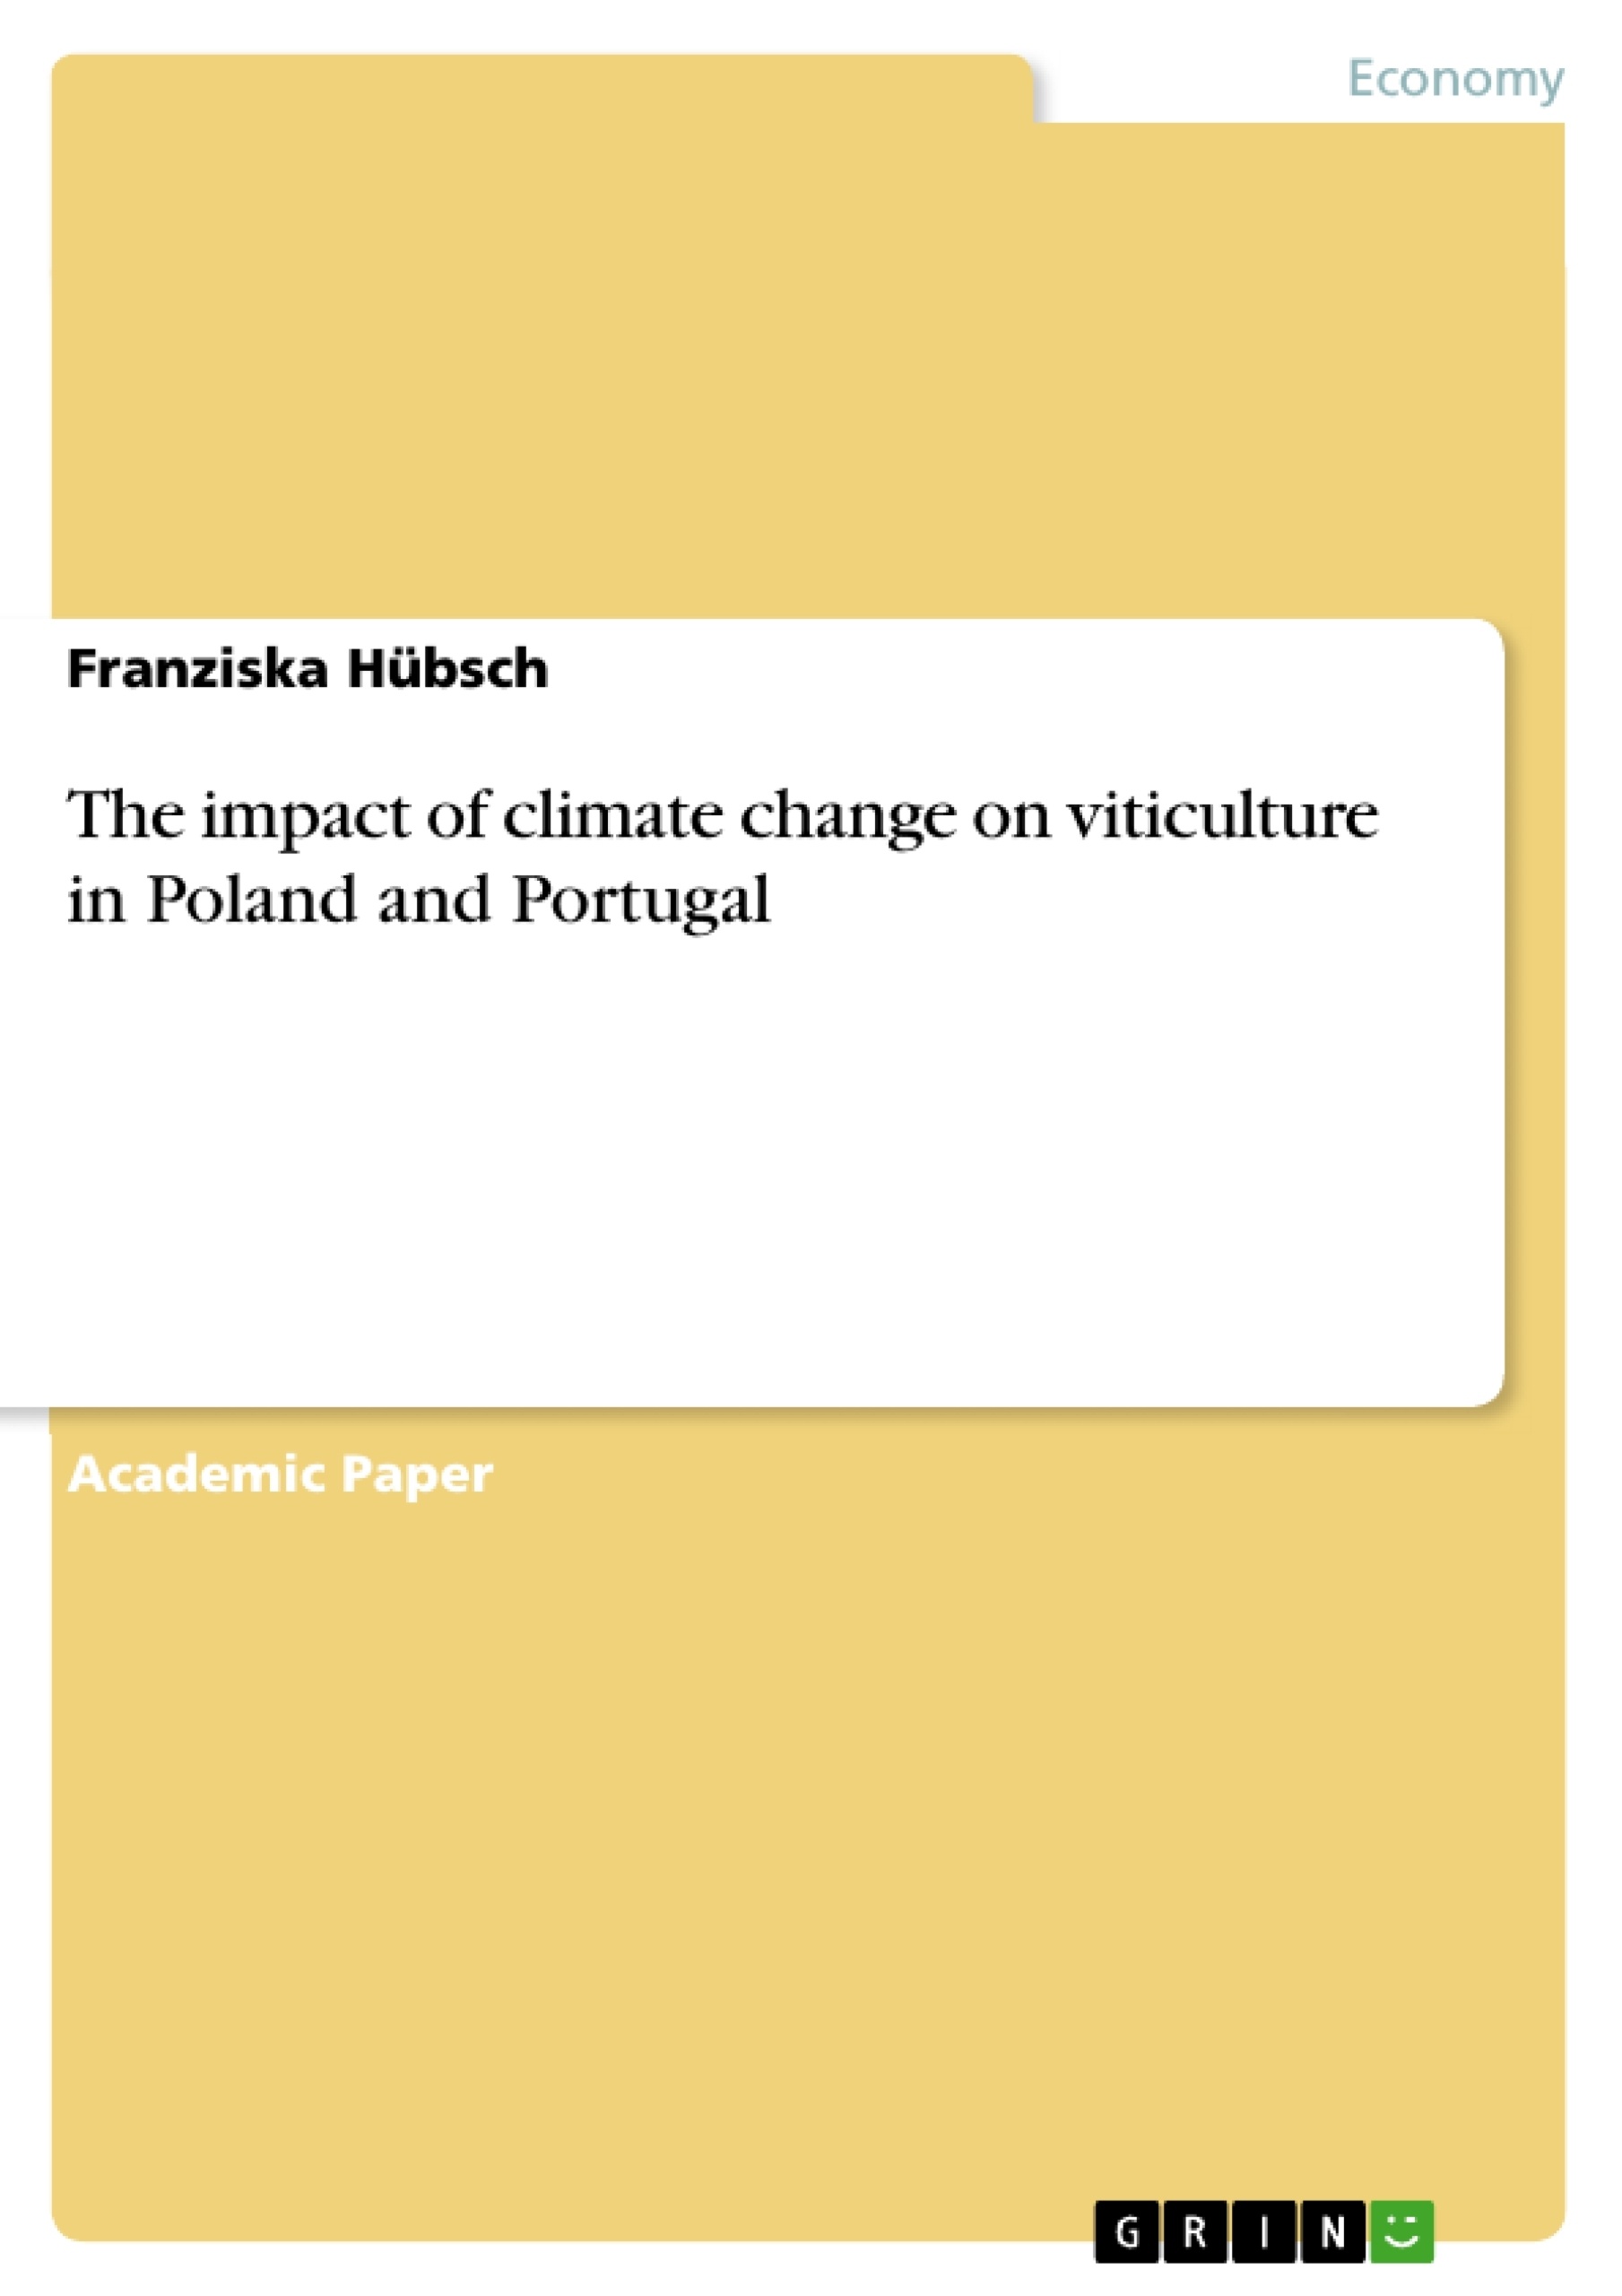 Title: The impact of climate change on viticulture in Poland and Portugal